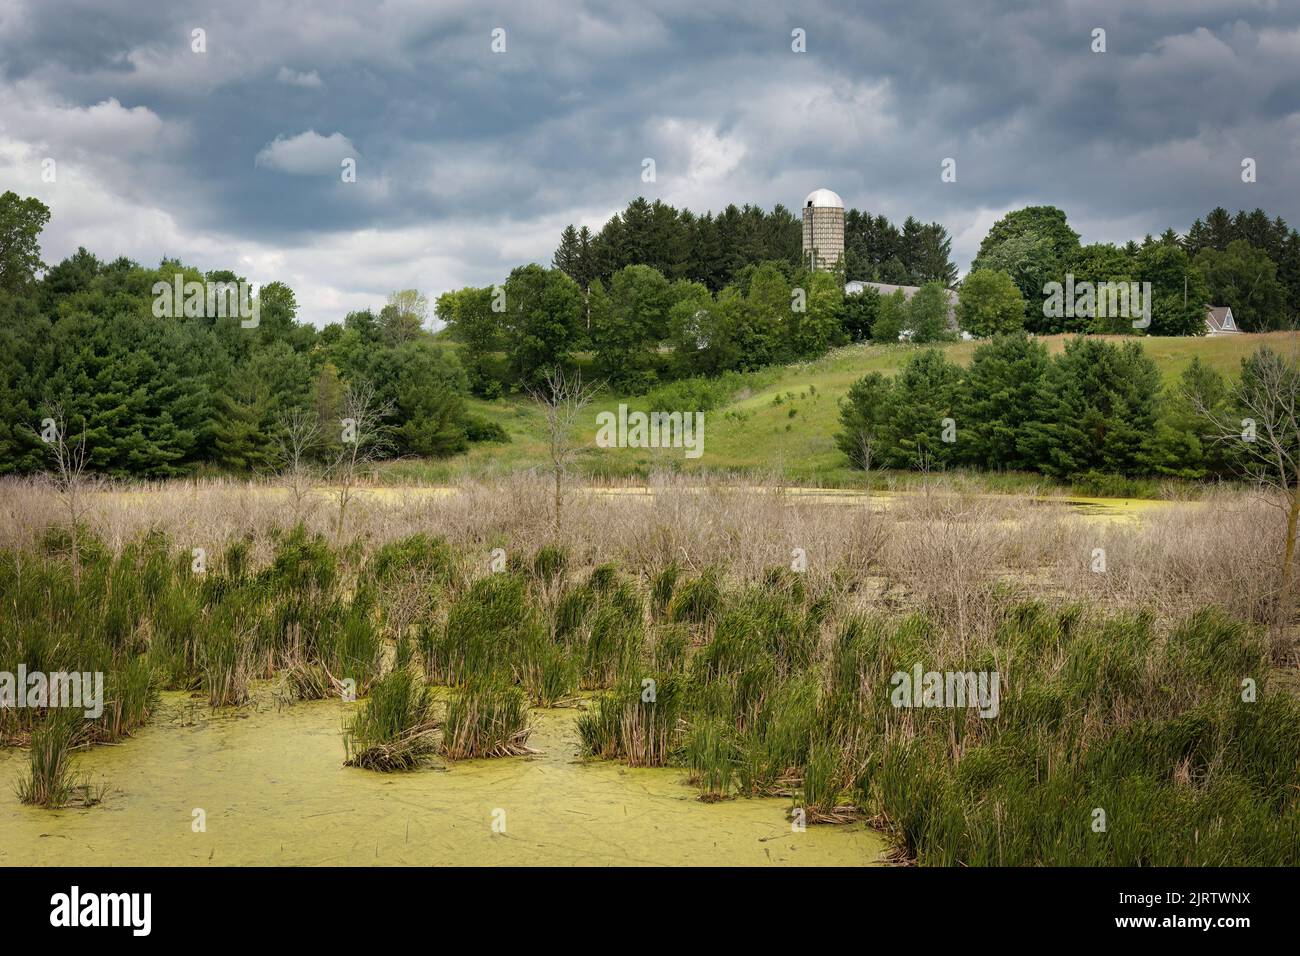 An overcast day above a swamp and farm in the background near Manitowoc, Wisconsin. Stock Photo